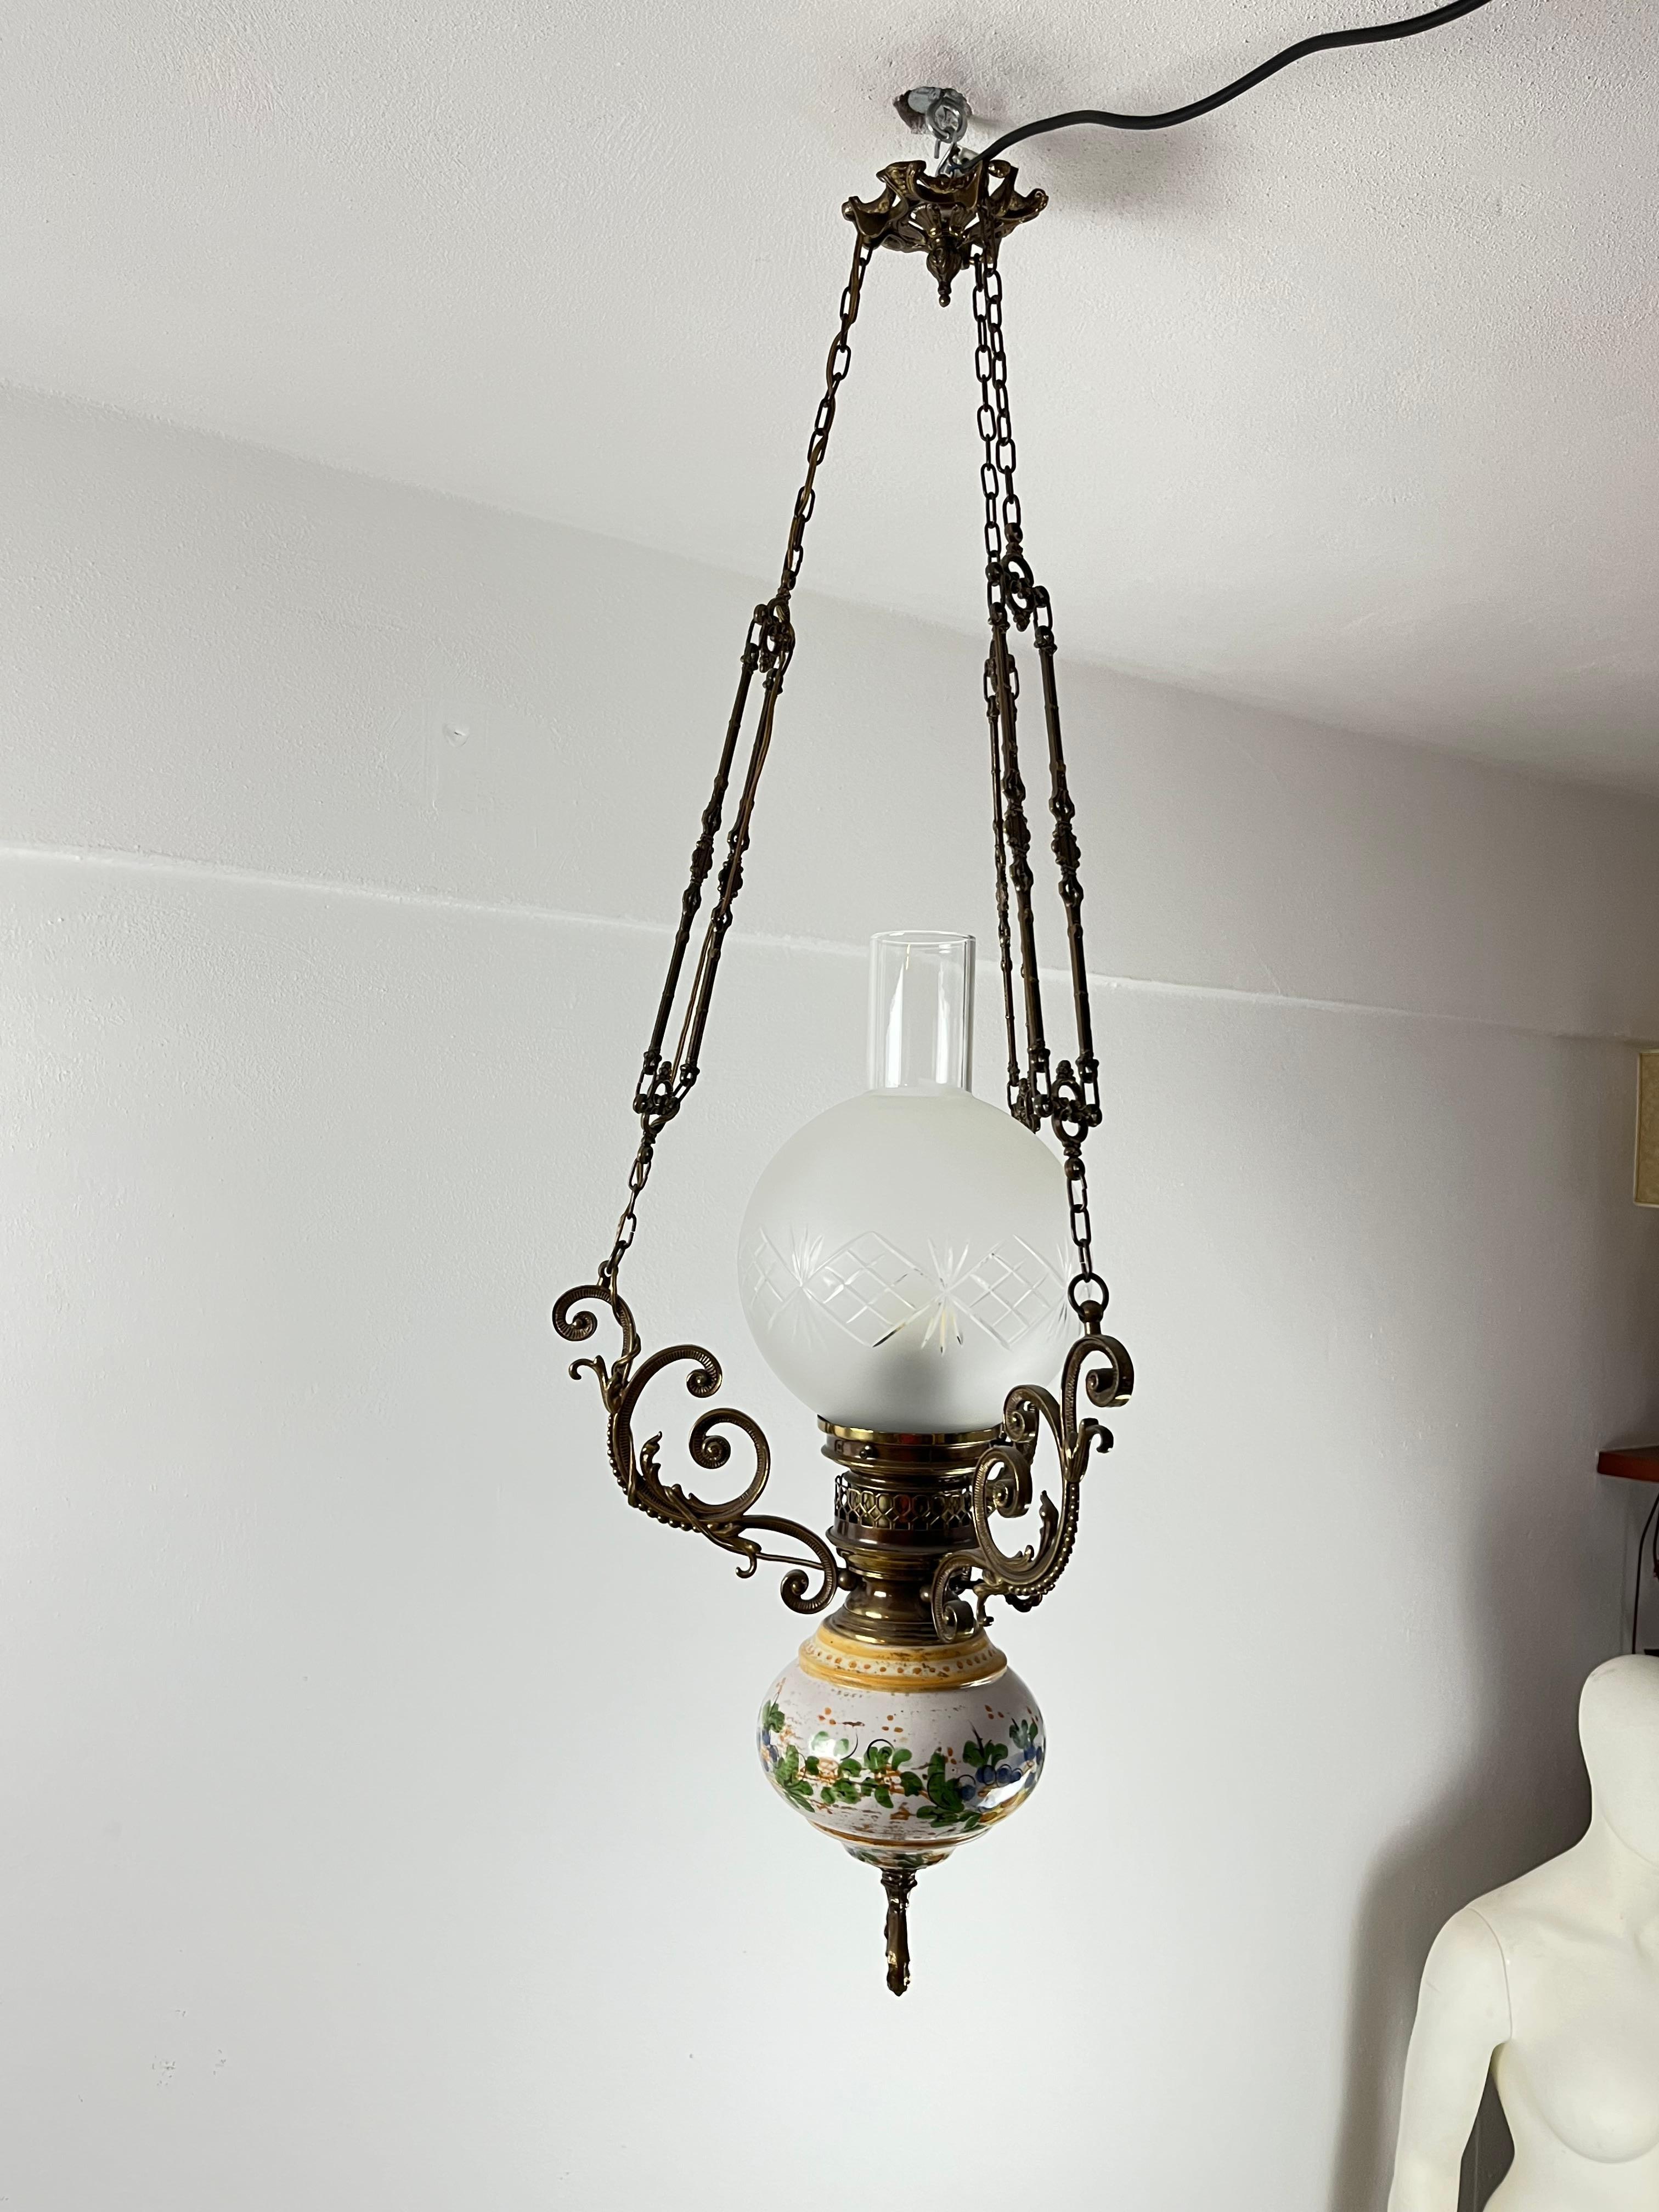 Mid-20th Century Bronze, Ceramic and Glass Chandelier, Italy, 1950s For Sale